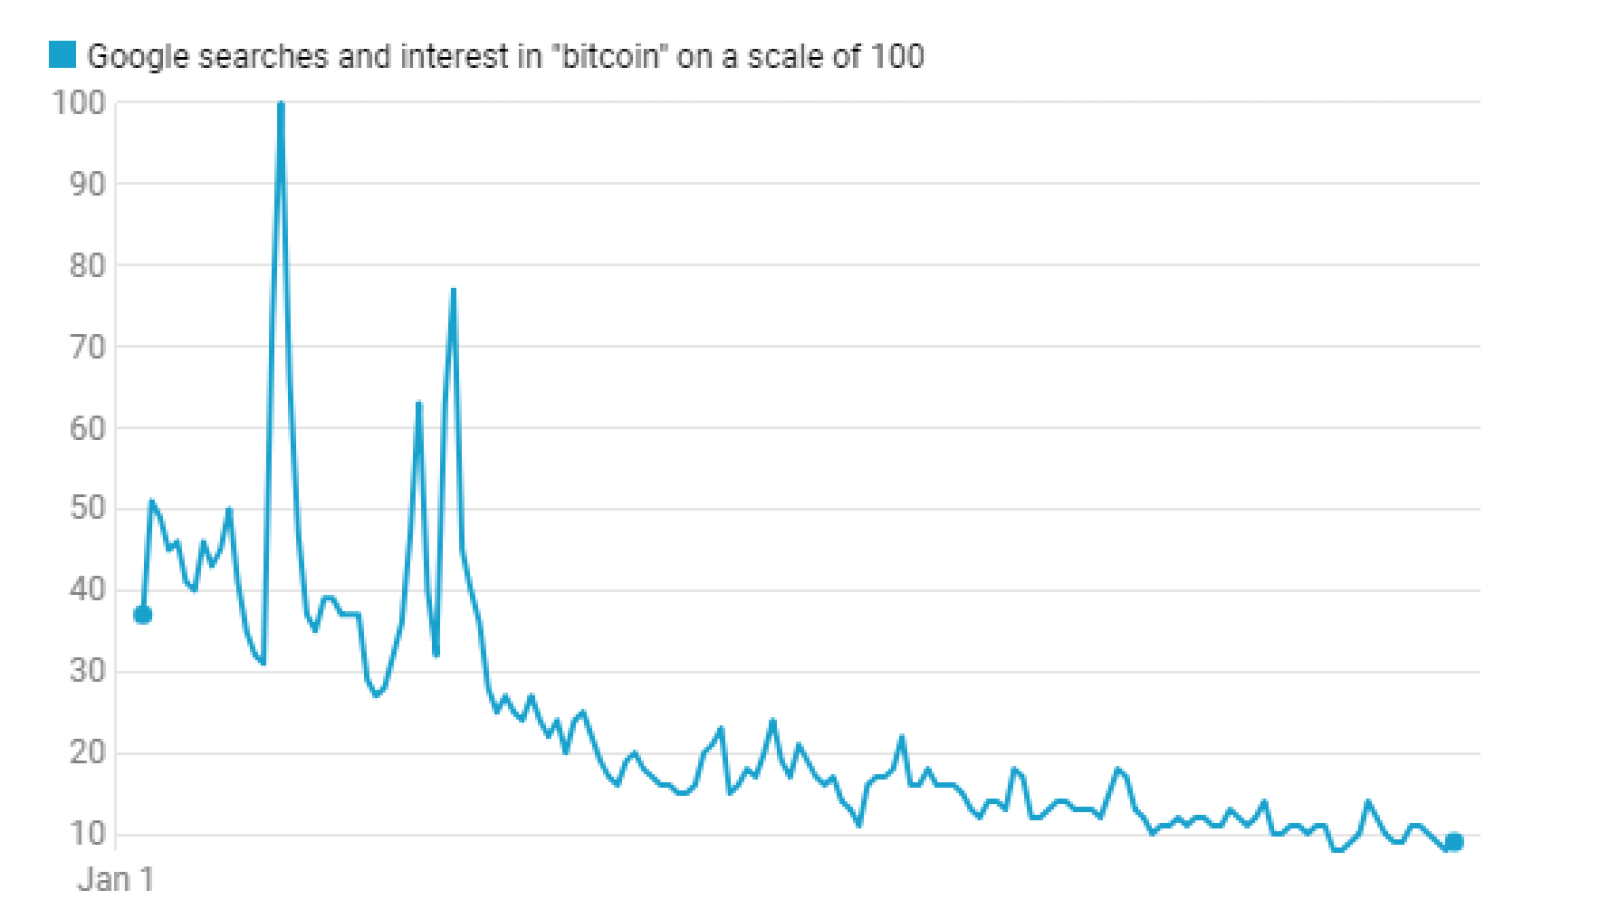 This dramatic drop shows a public’s dwindling interest in Bitcoin